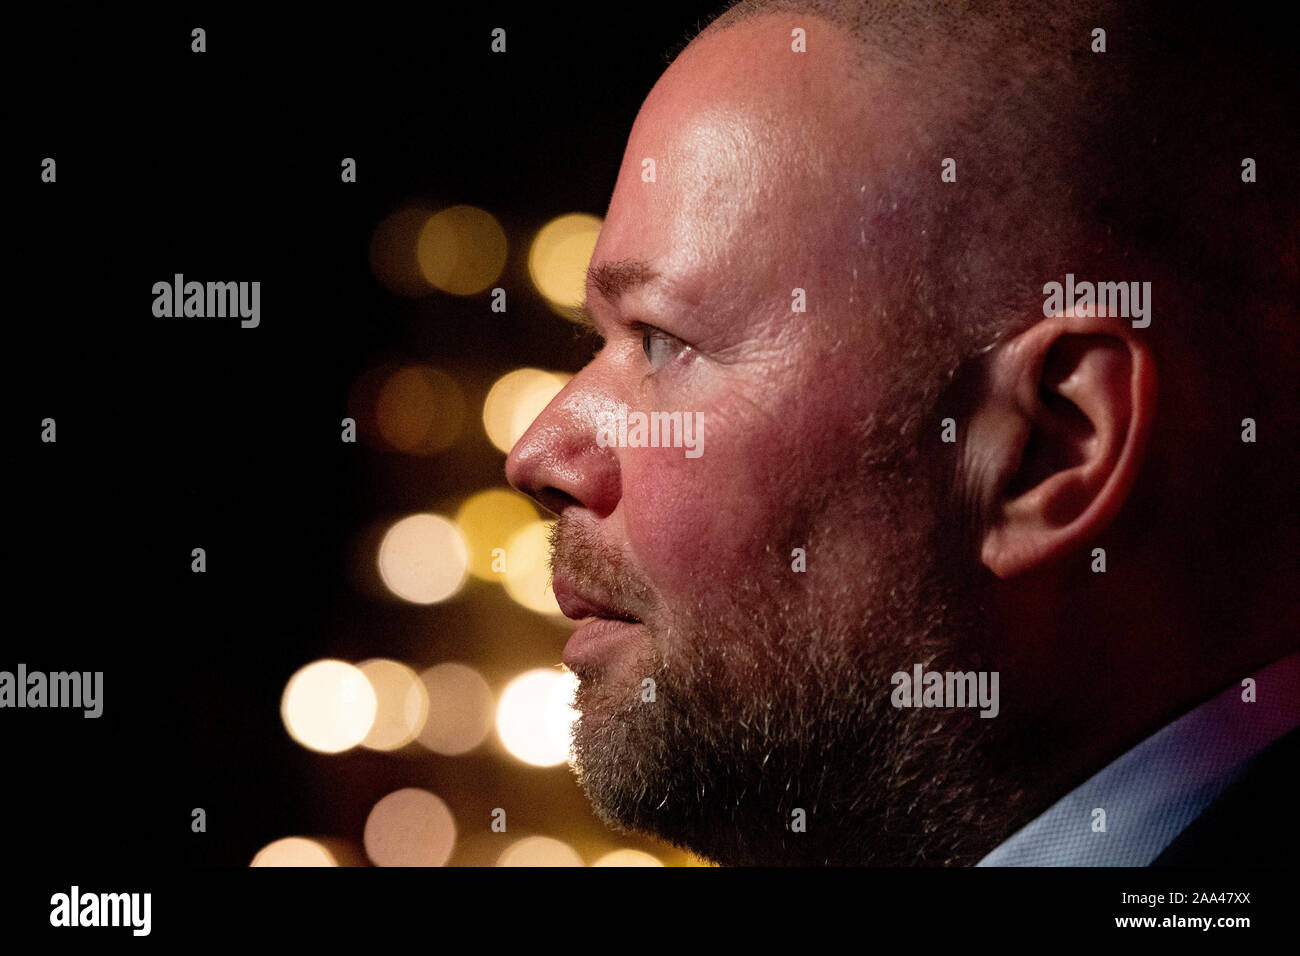 Utrecht, Netherlands. 19th Nov, 2019. RIJSWIJK, Centre, 19-11-2019, Raymond van Barneveld at the launch party of his new book ‘Game Over'. Credit: Pro Shots/Alamy Live News Stock Photo